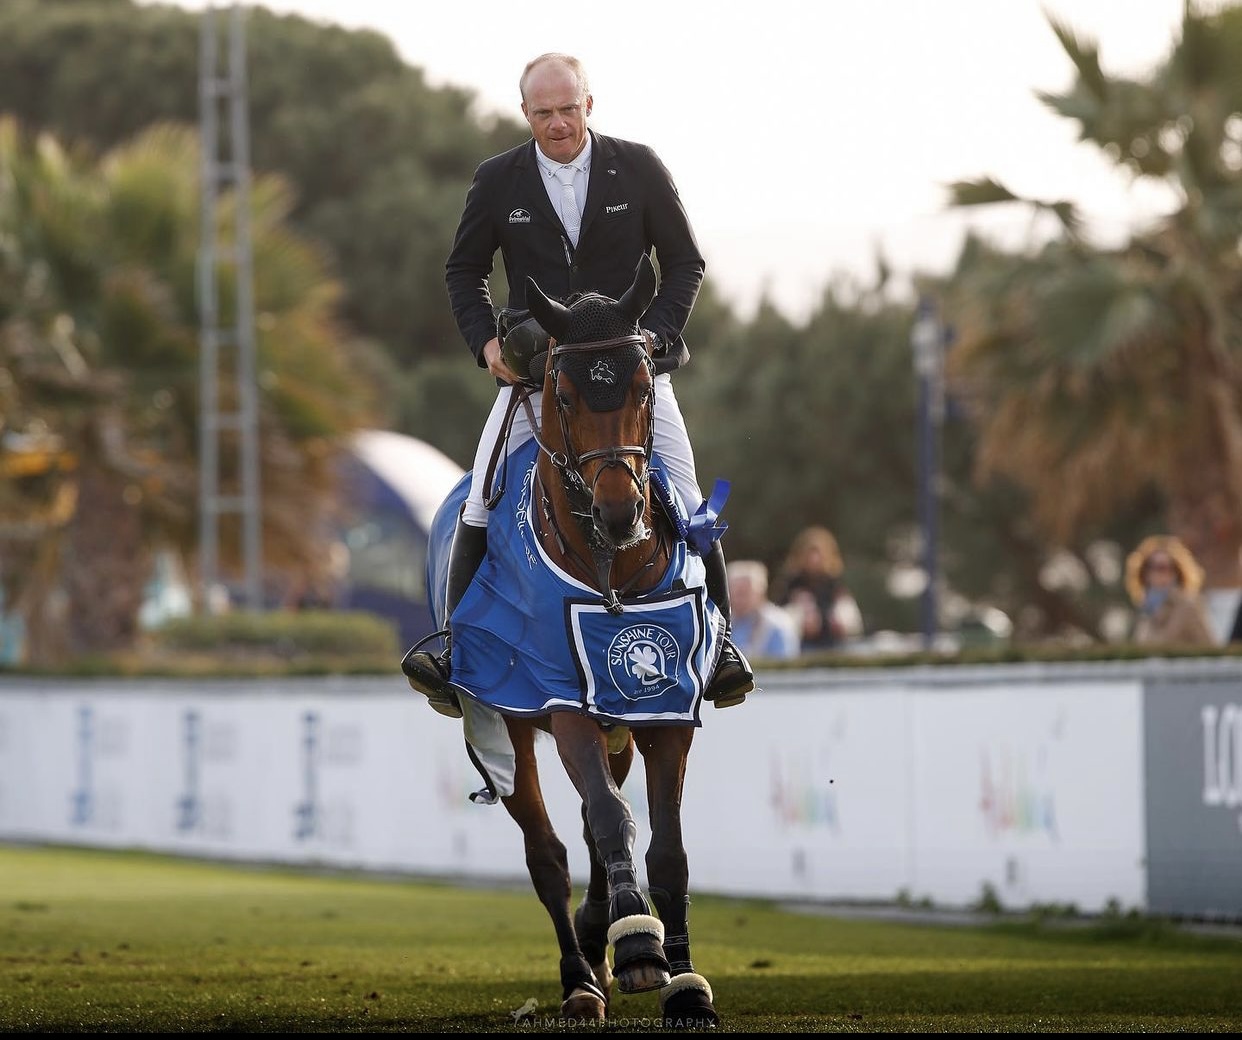 Willem Greve scores victory in CSI4* 1.50m Big Tour at the Andalucia Sunshine Tour